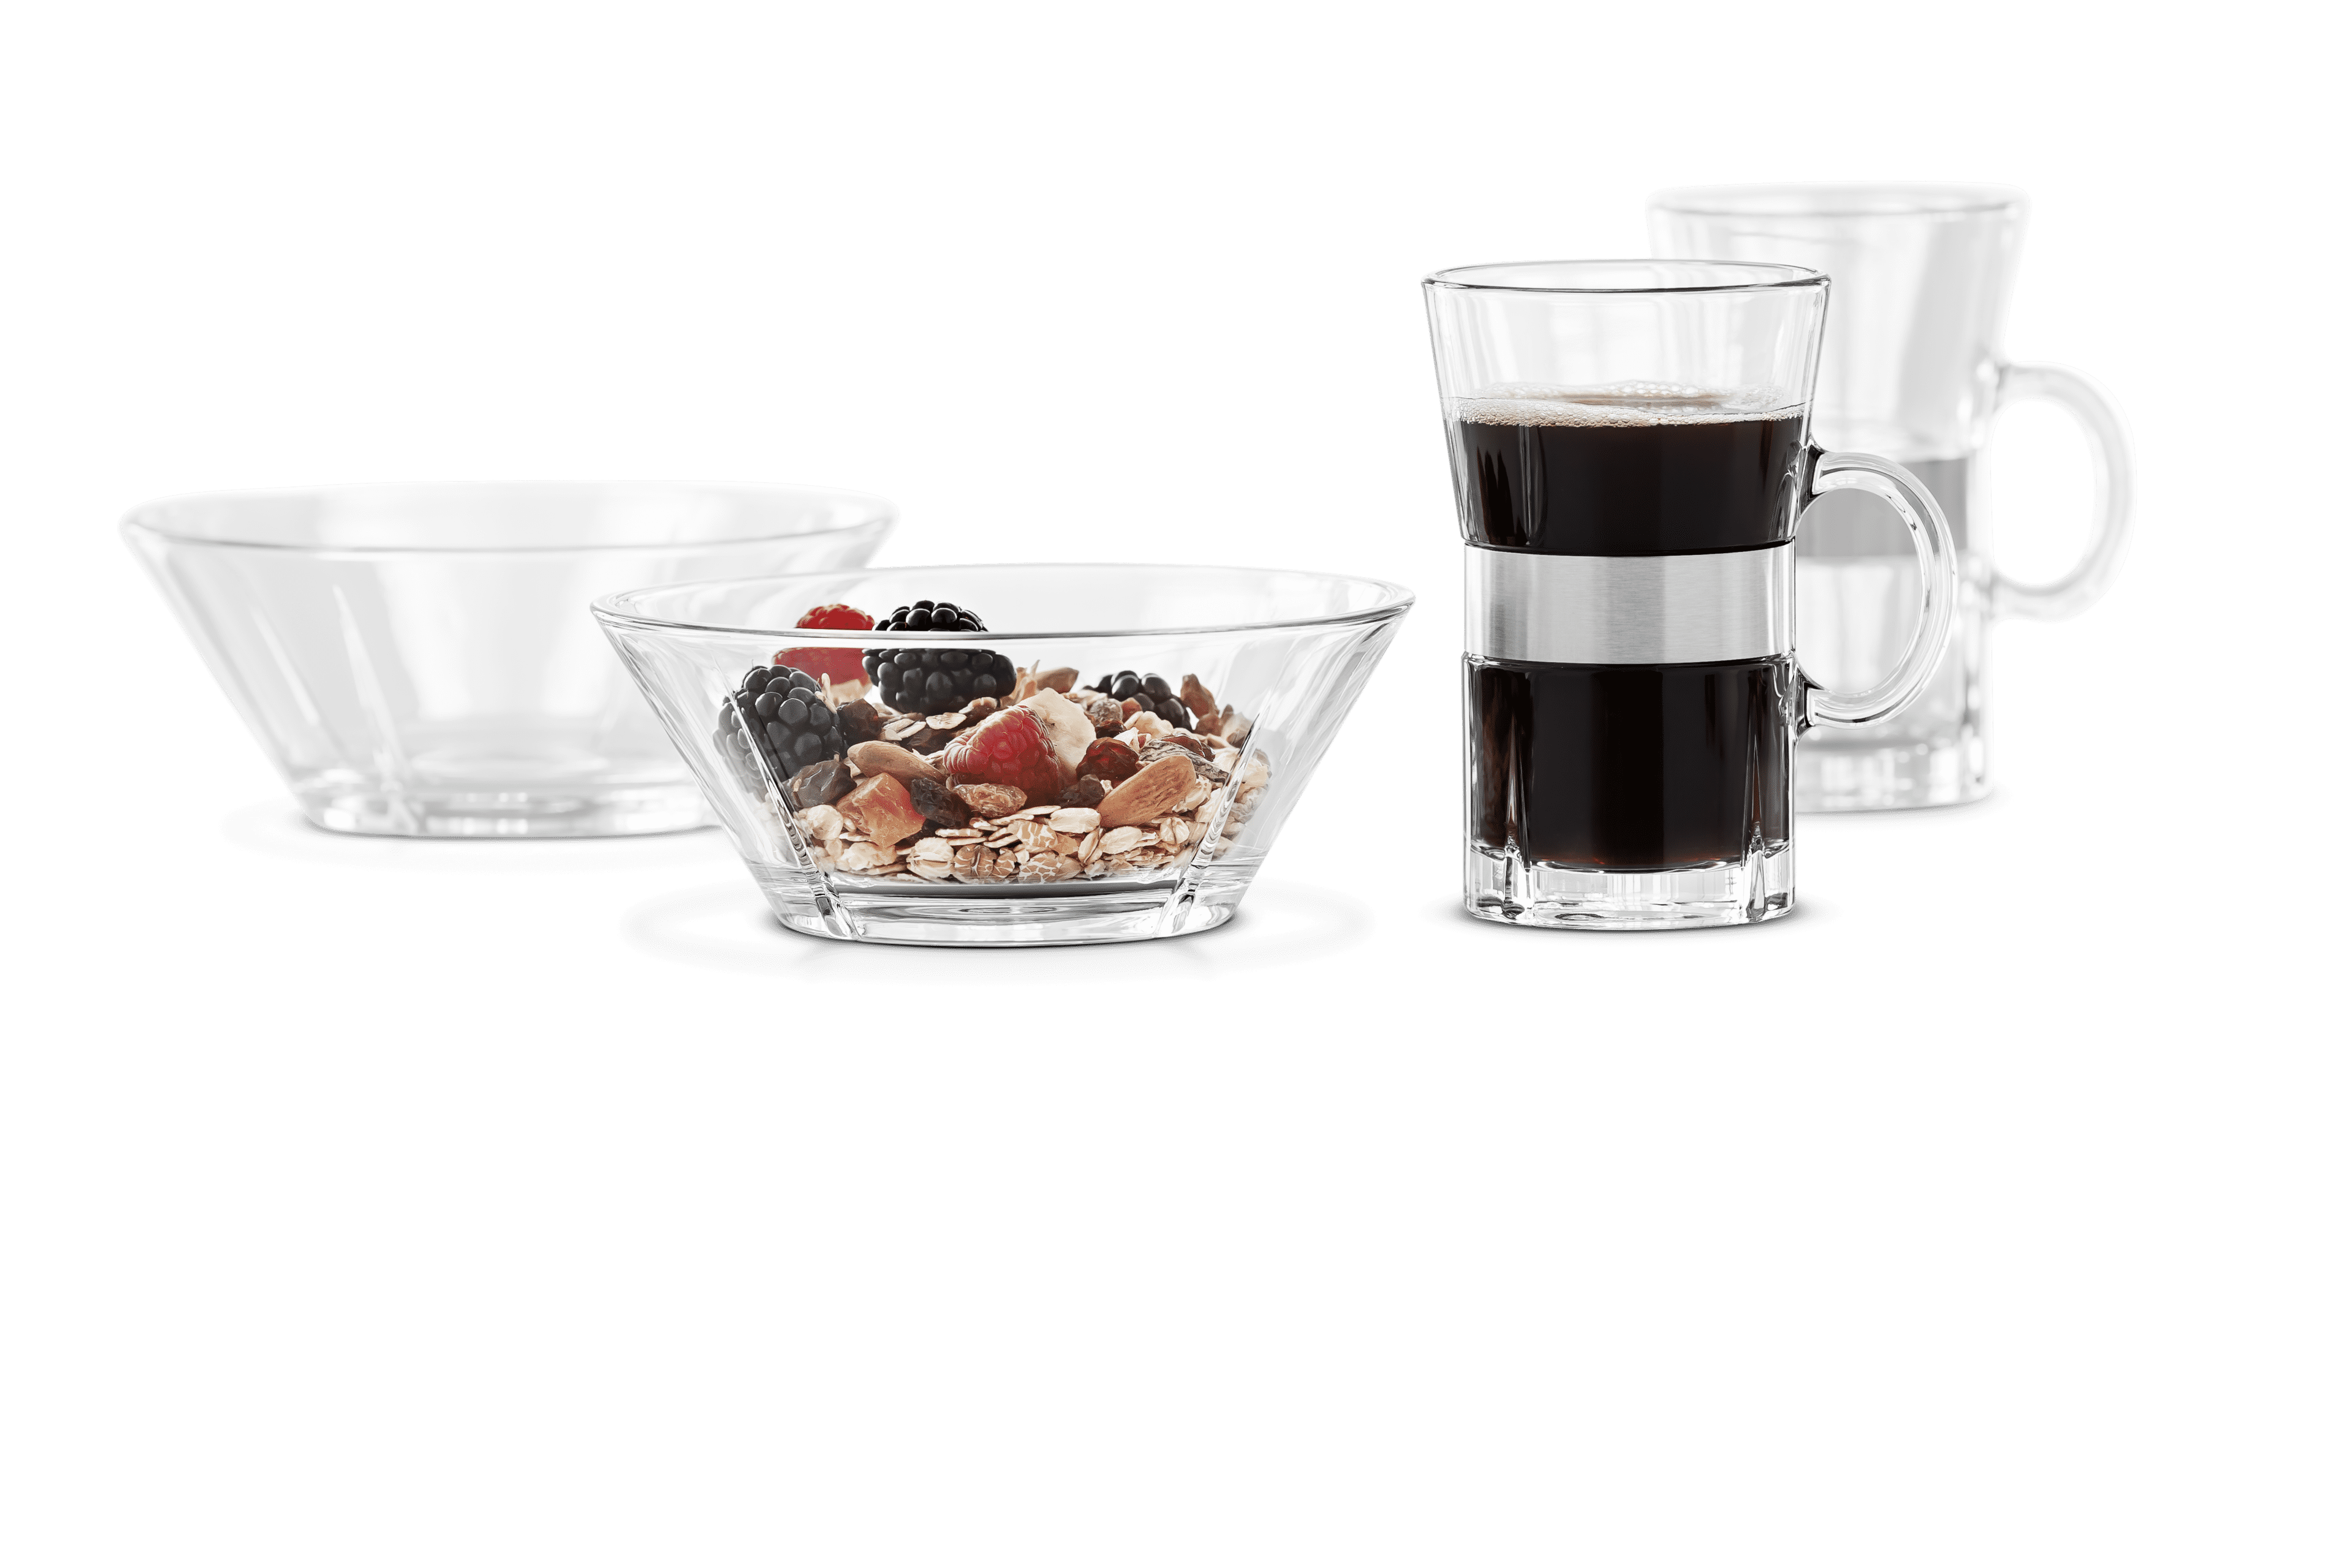 Breakfast set 2 pers.: Hot drink and bowl